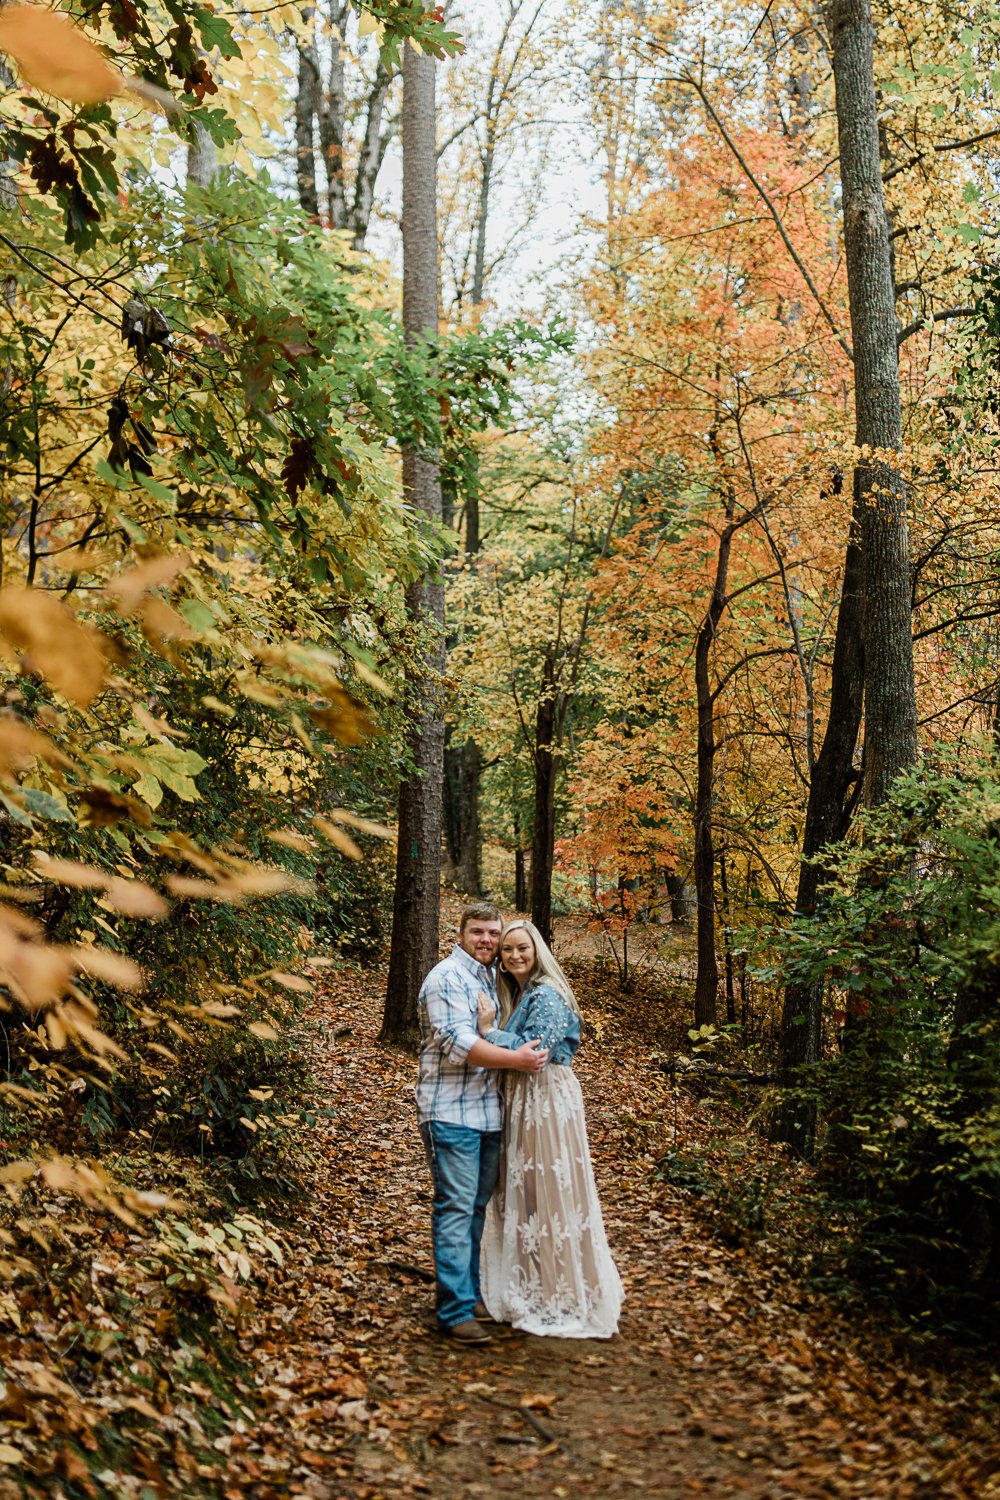 5 of the best places to take engagment photos in greenville sc-8.jpg